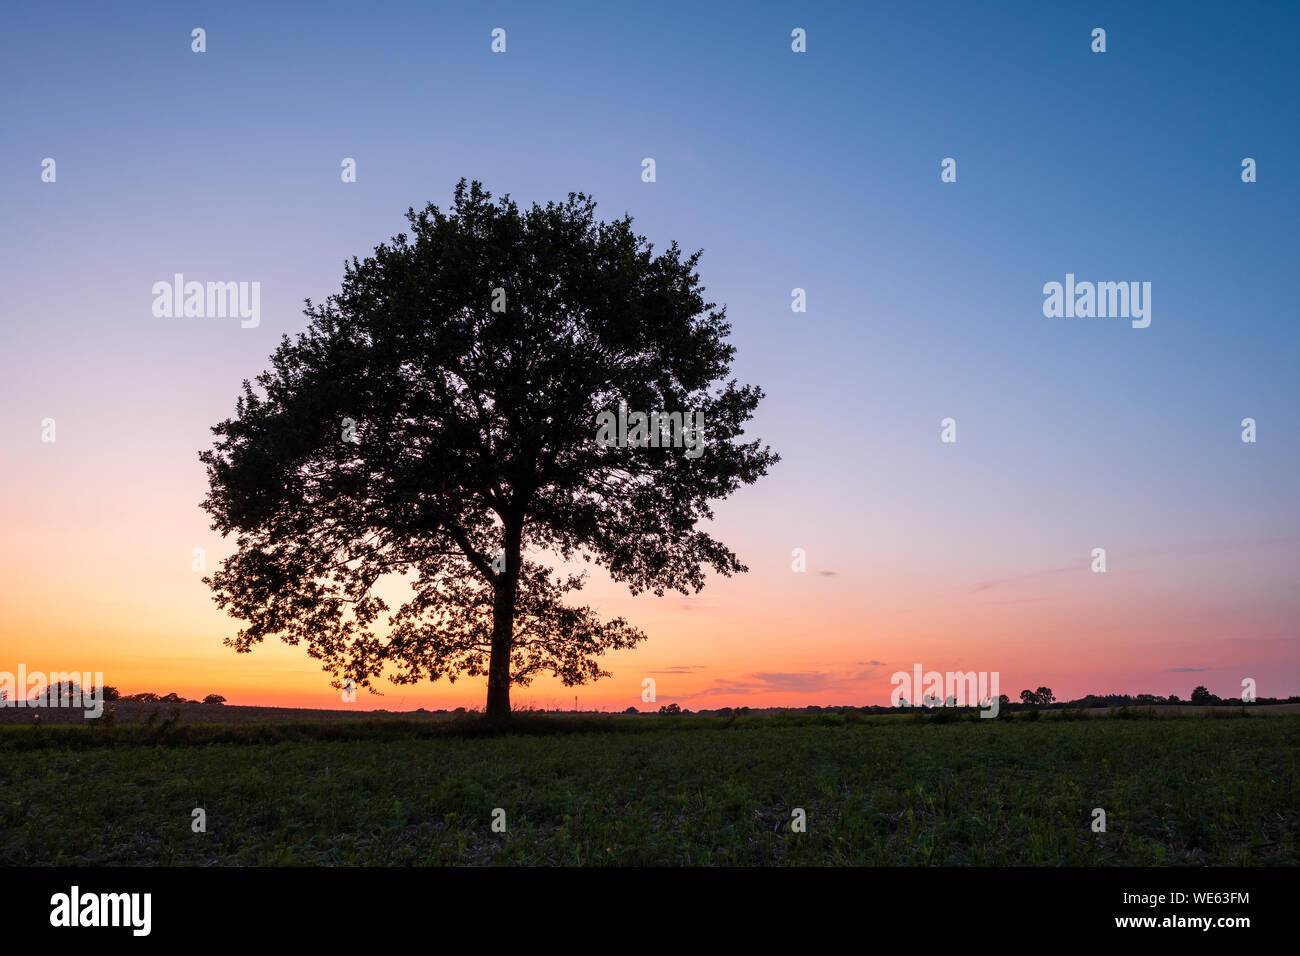 Silhouette of single tree on a field in front of clear sky at colorful sunset, Schleswig-Holstein Stock Photo